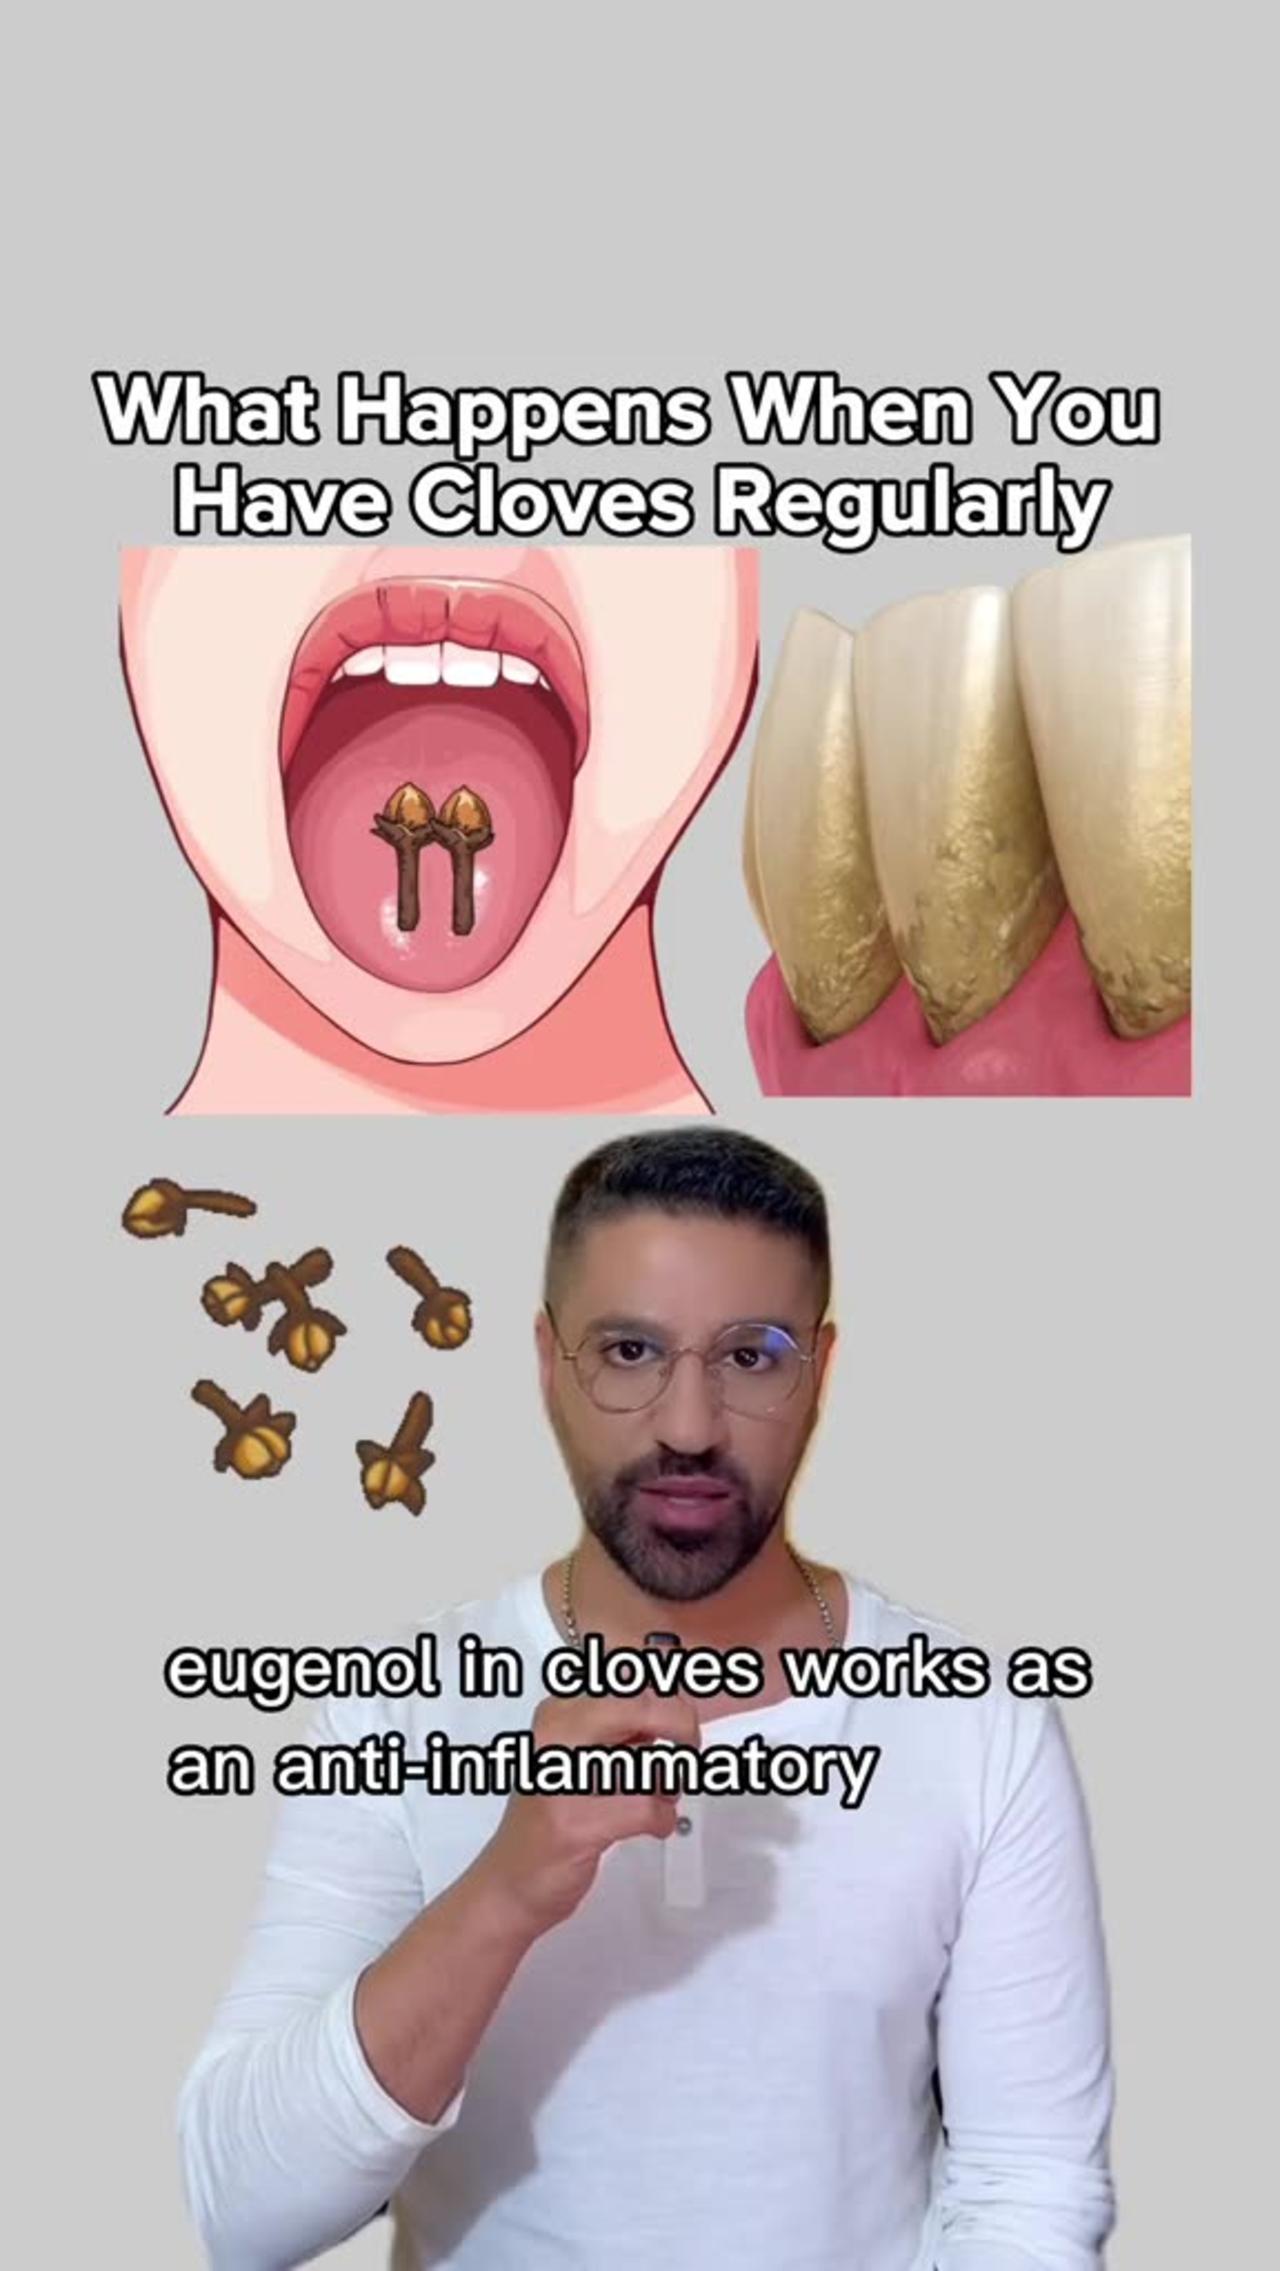 Did you know that cloves are not only great for oral health but also commonly used by dentists